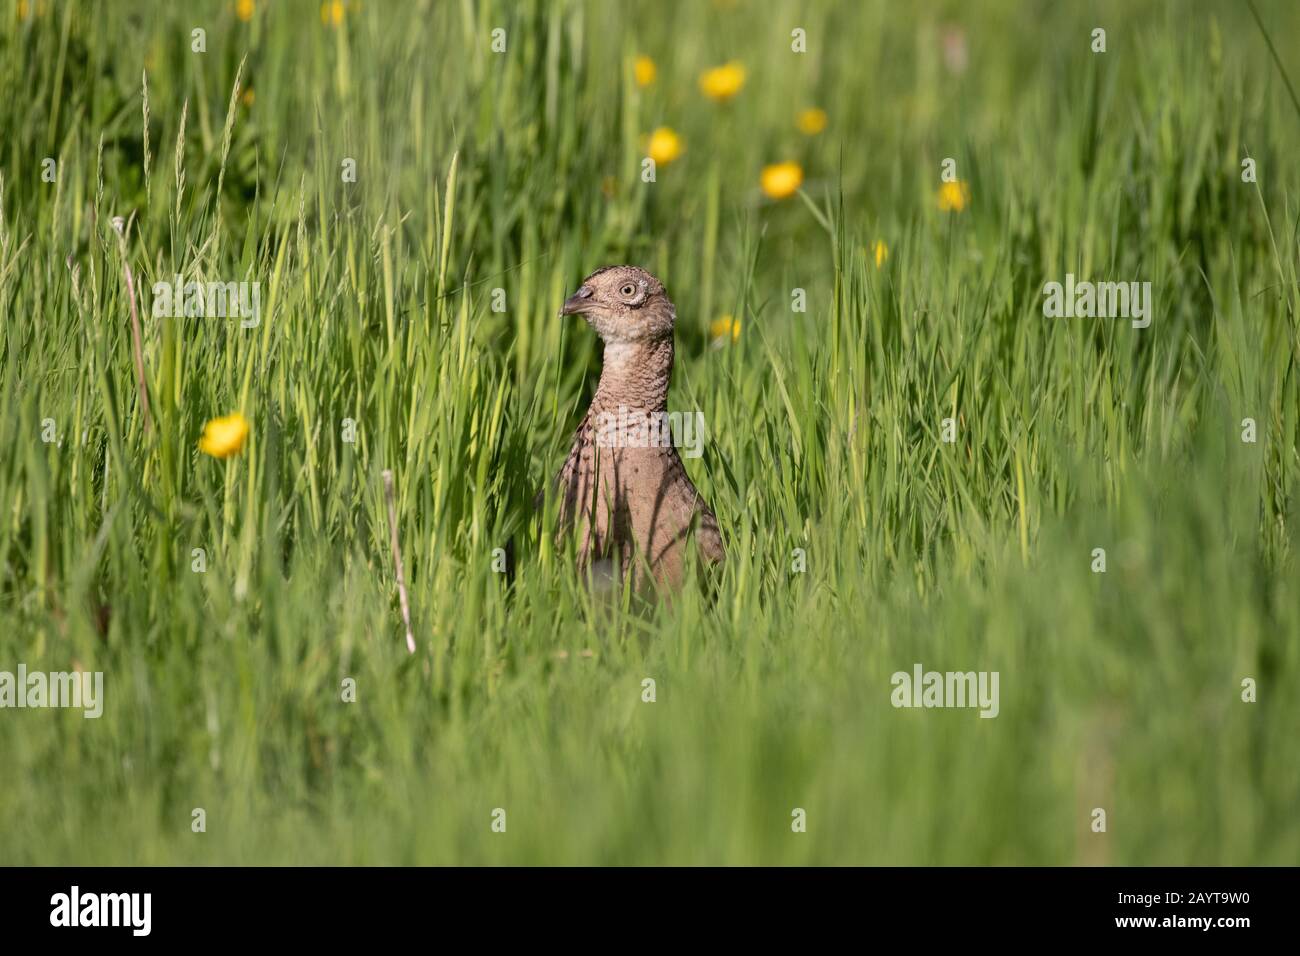 A cautious female pheasant hiding in long lush green grass with wildflowers in the background Stock Photo